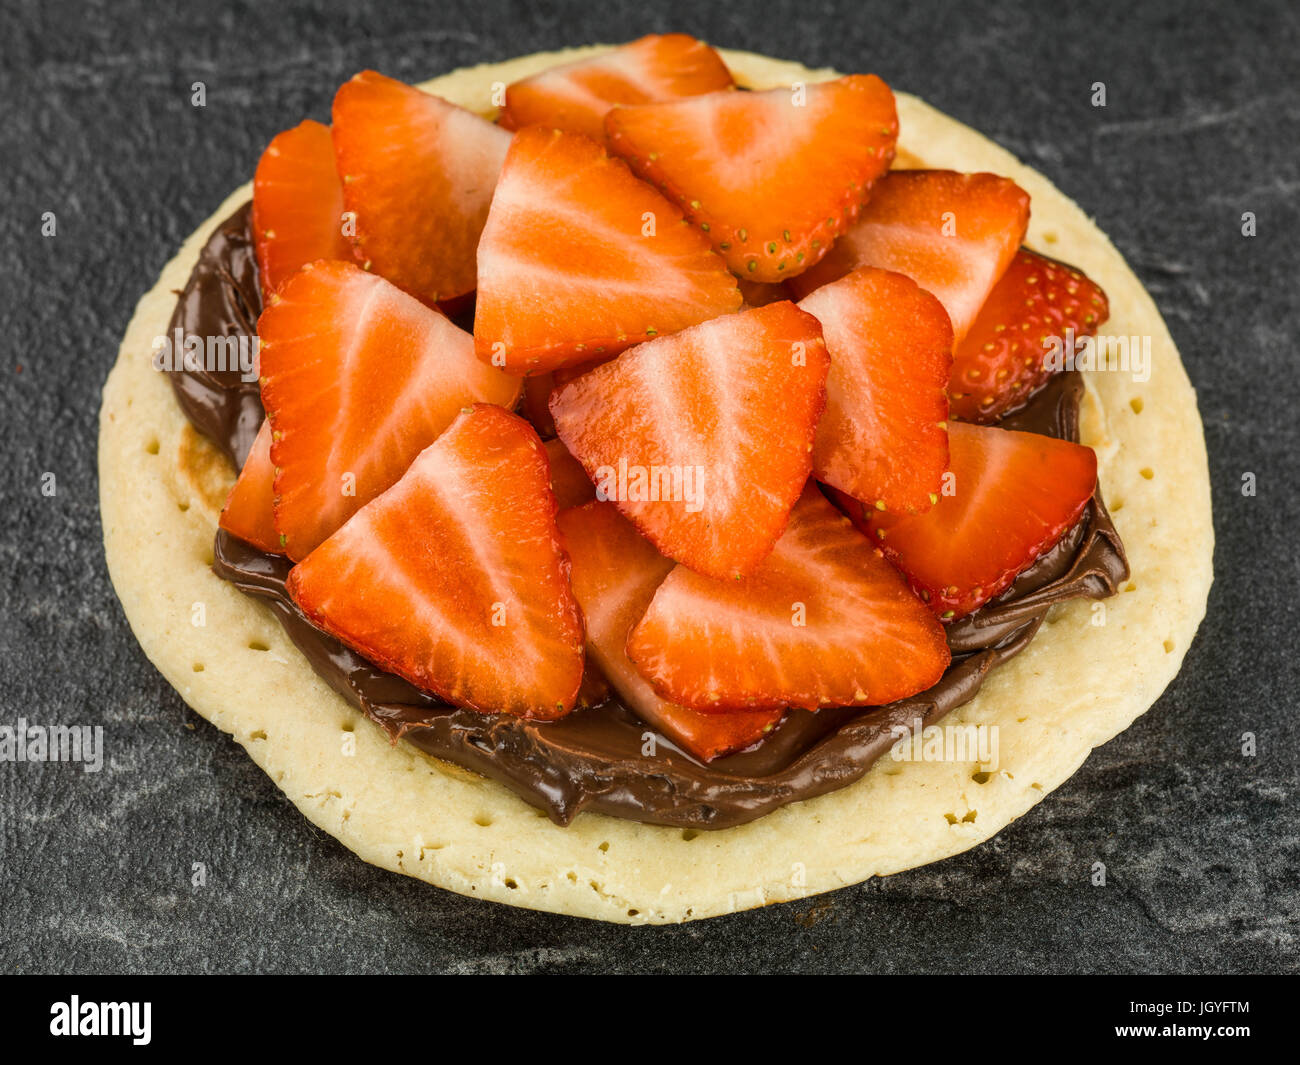 Pancake With Strawberries and Chocolate Spread Against A Black Background Stock Photo